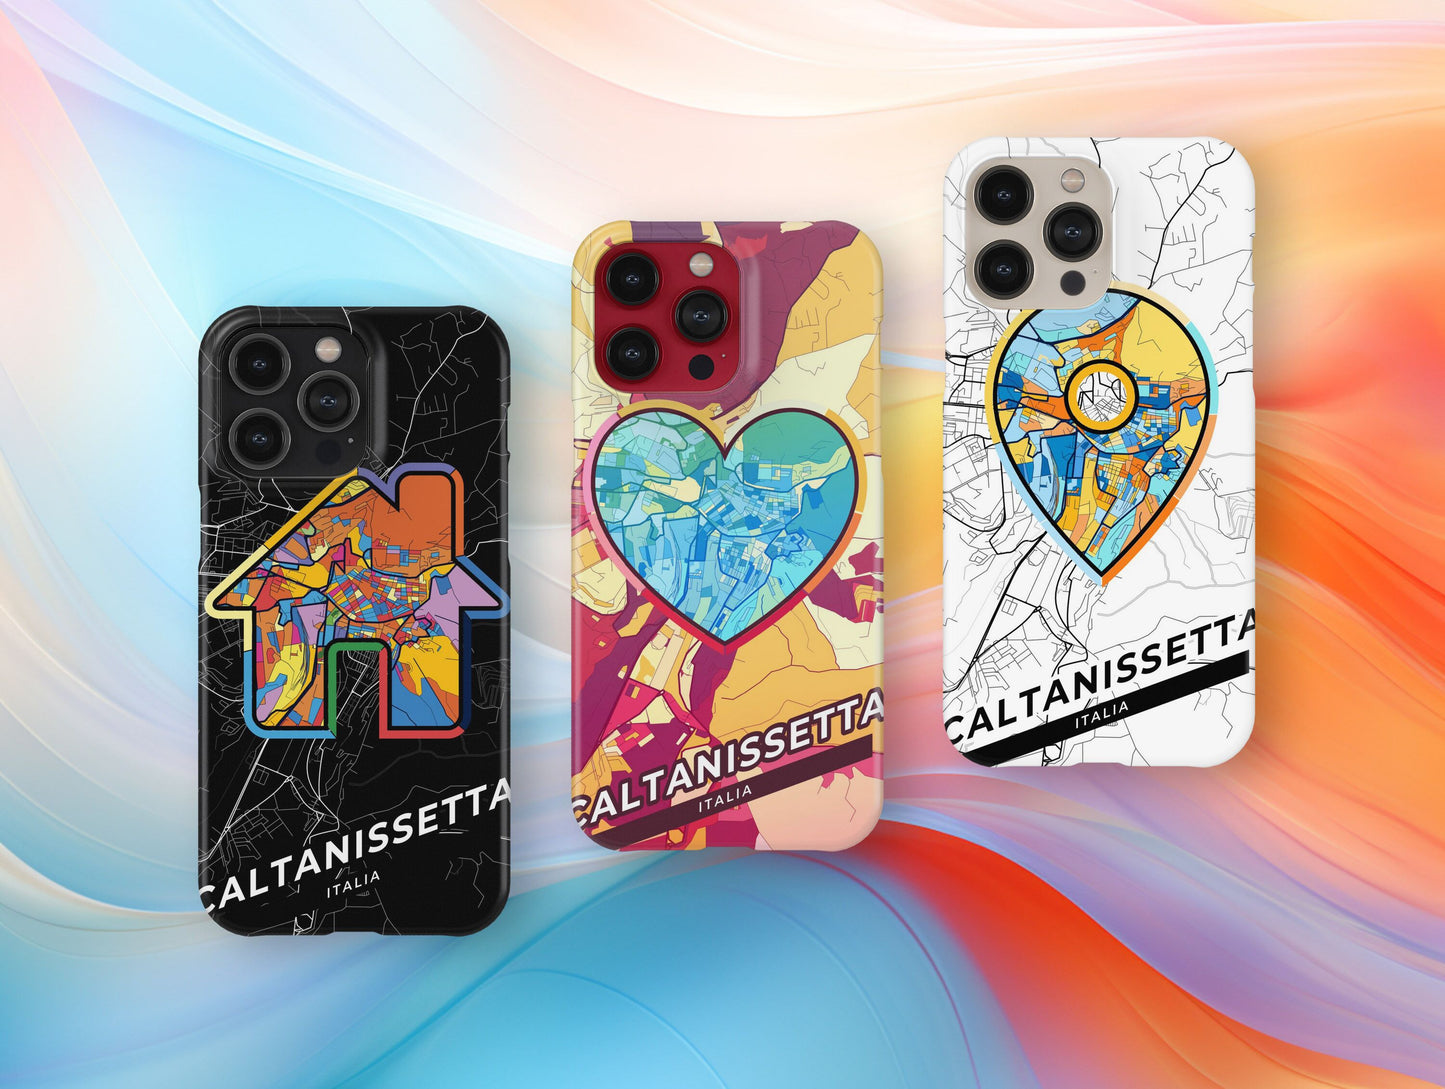 Caltanissetta Italy slim phone case with colorful icon. Birthday, wedding or housewarming gift. Couple match cases.